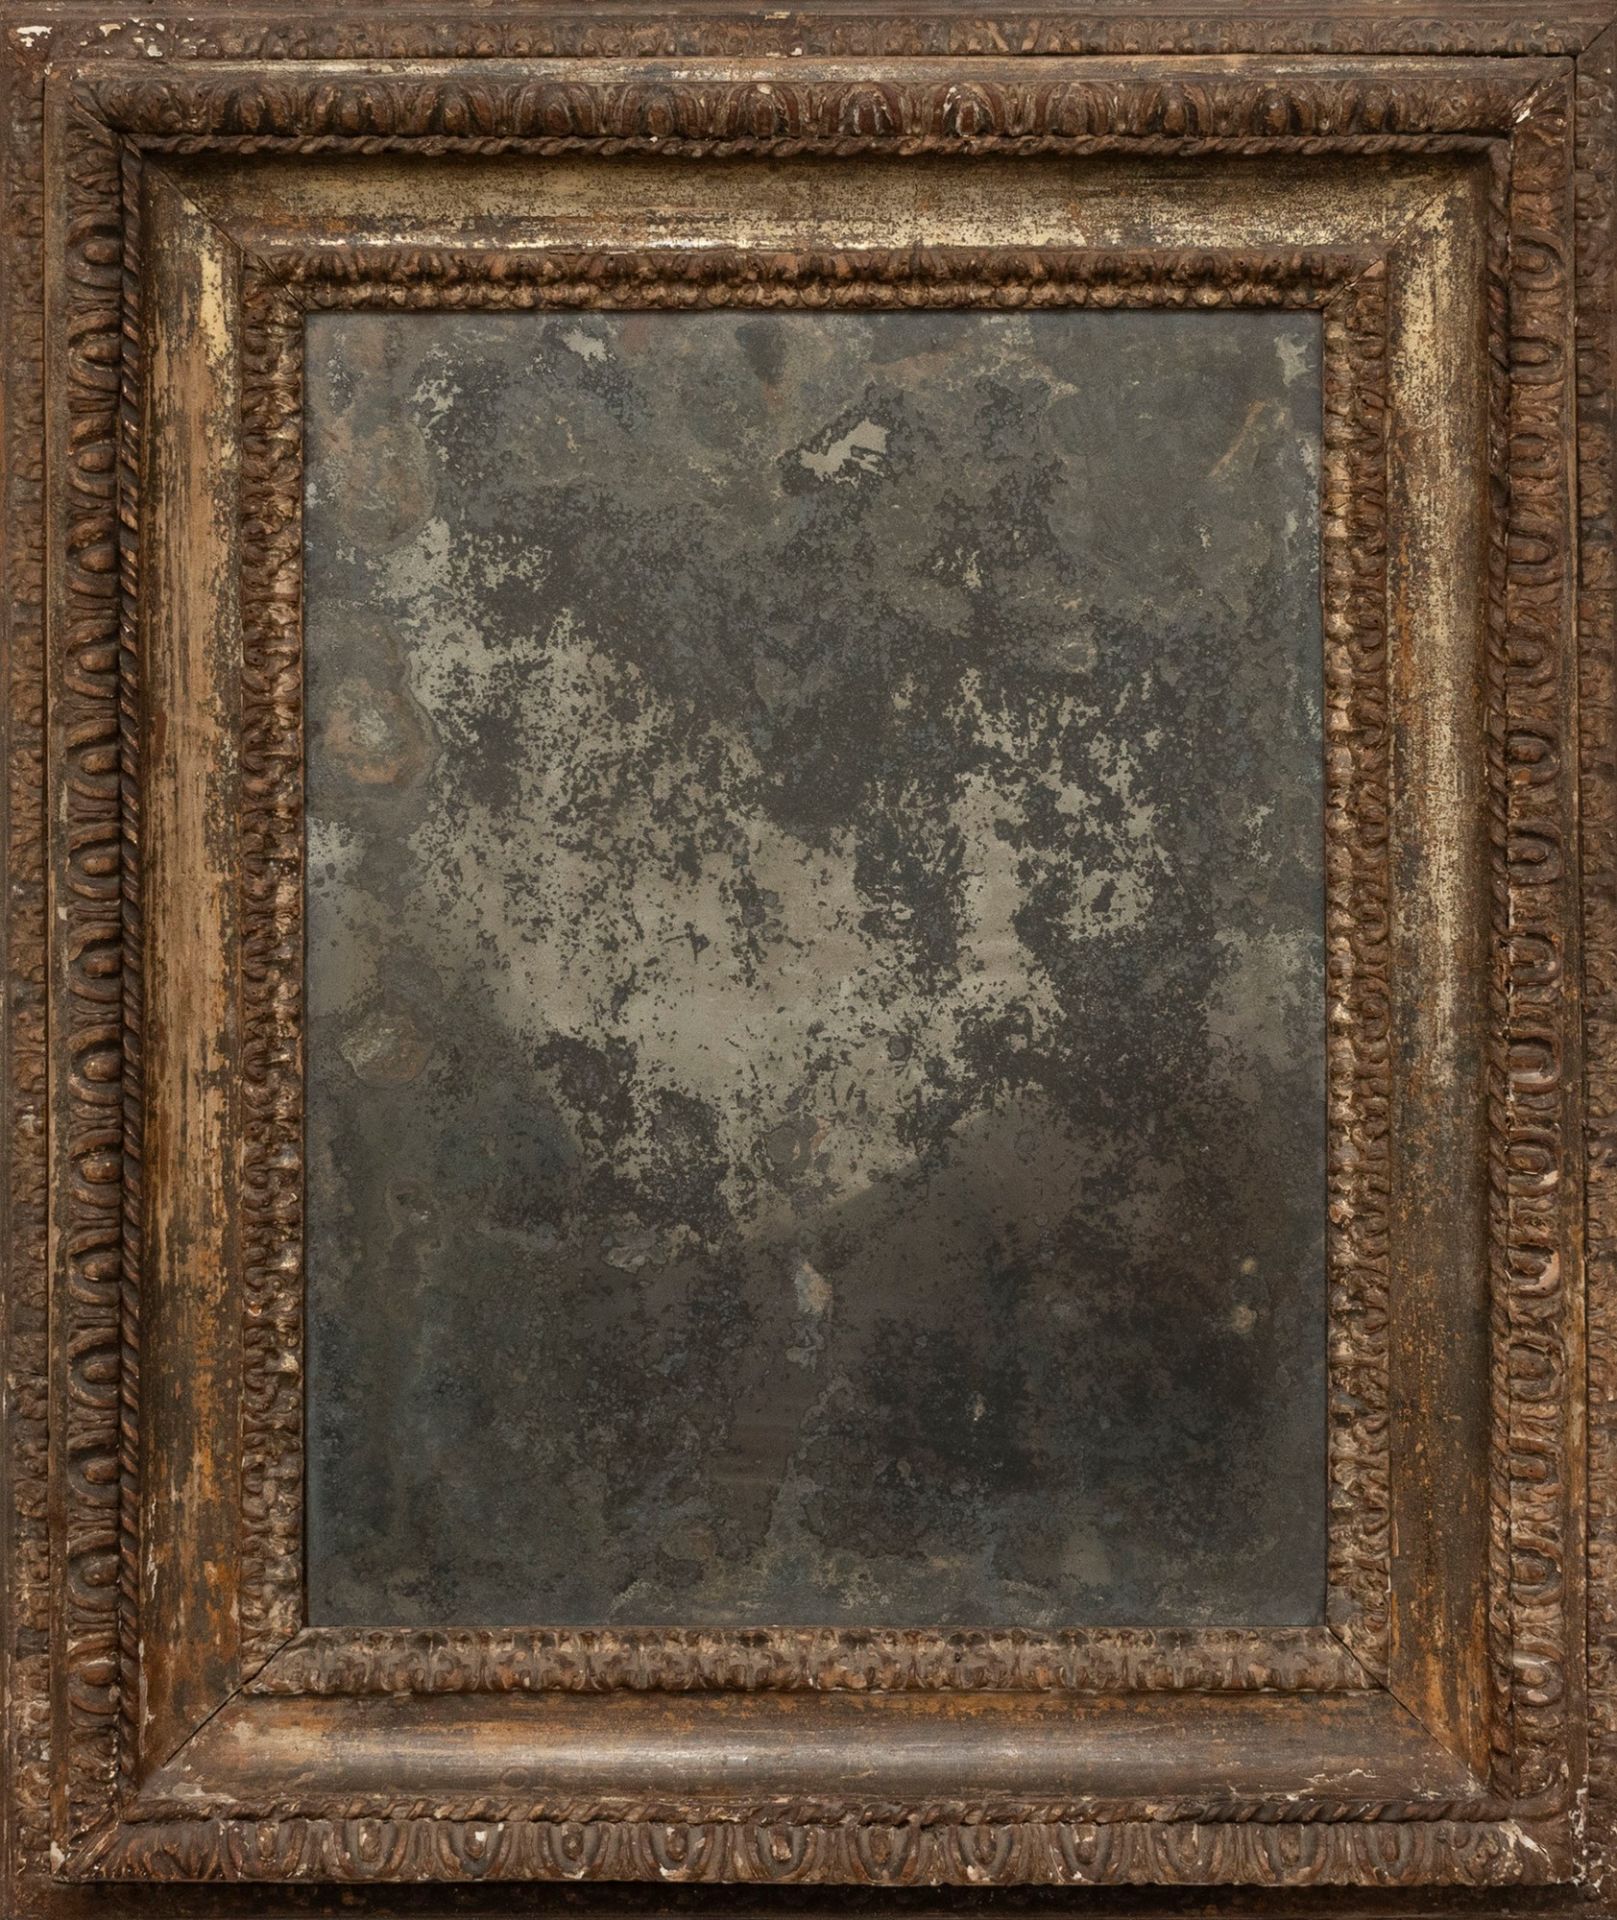 Salvator Rosa frame in carved wood, 18th century